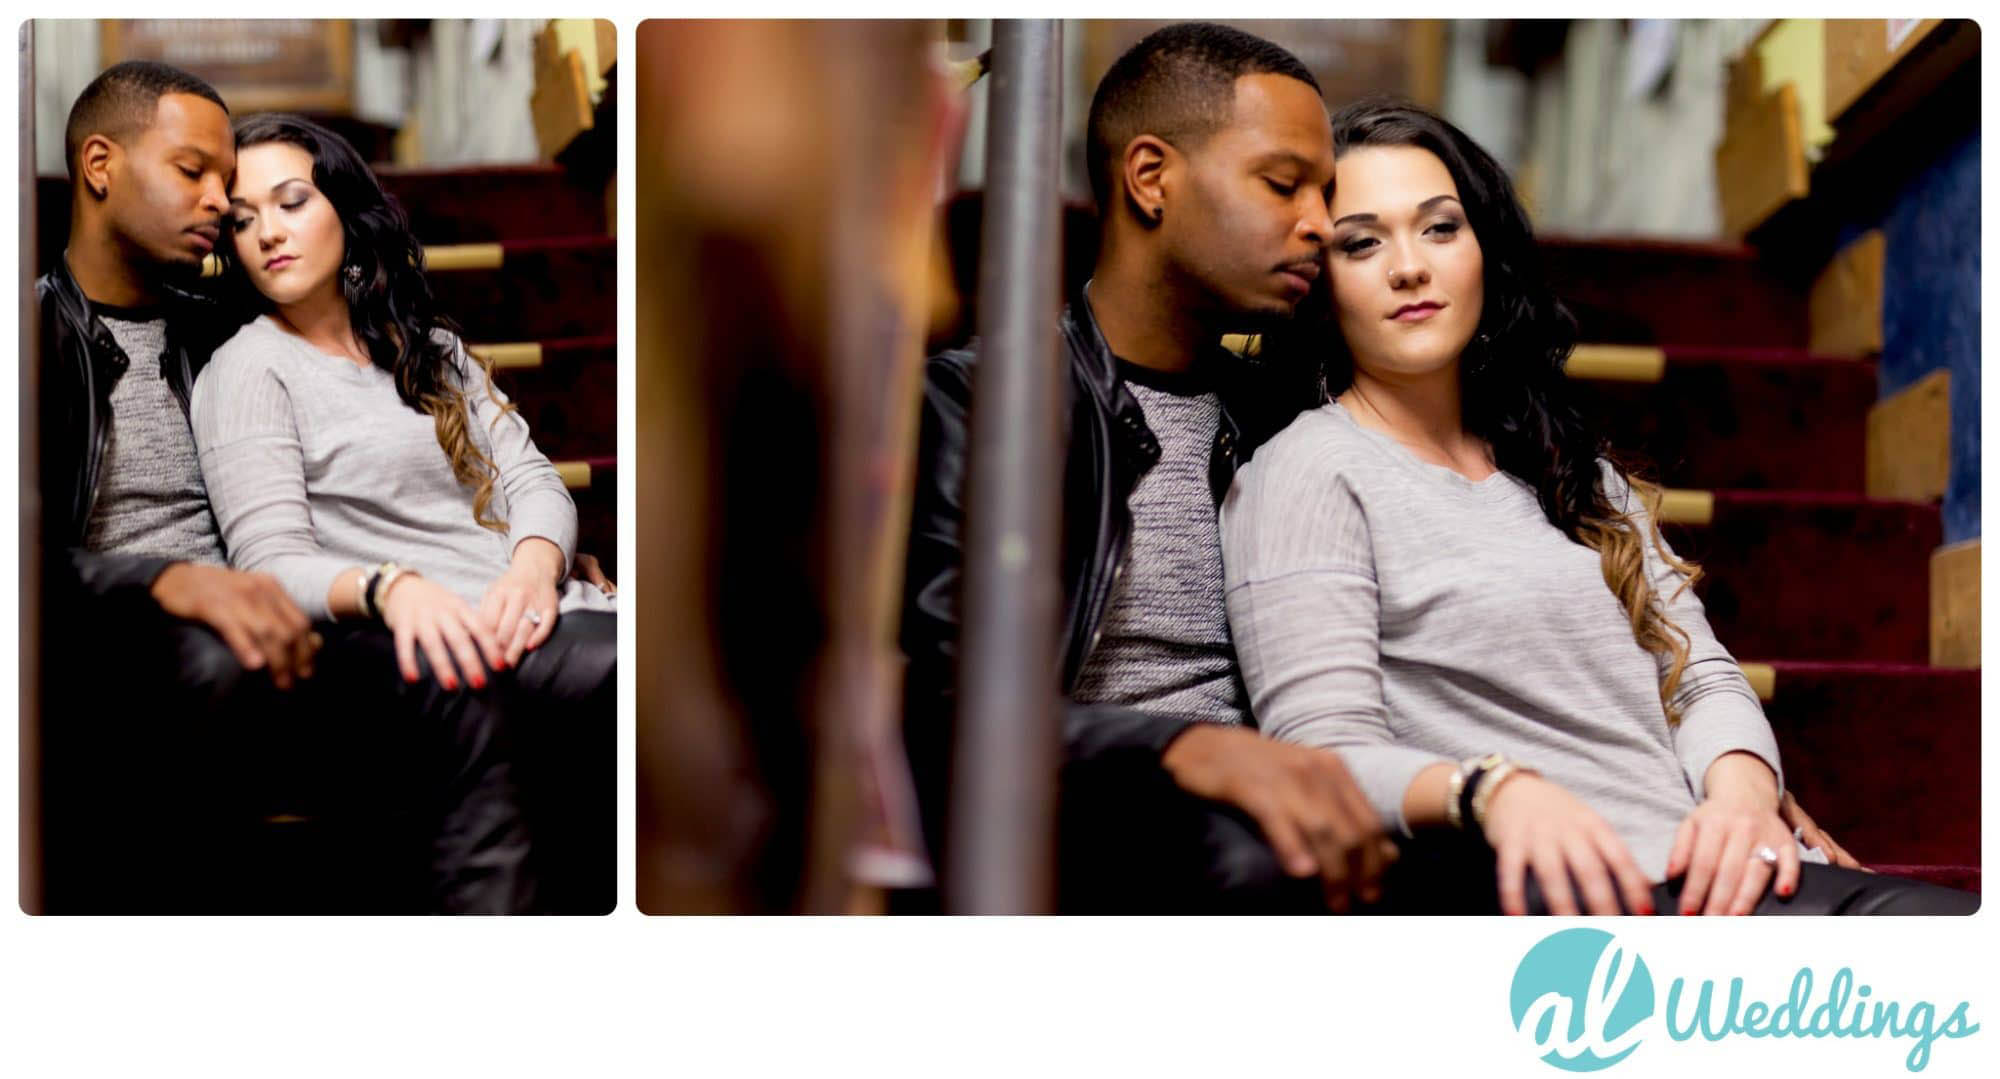 Birmingham,Charlemagne Records,engagement,photography,